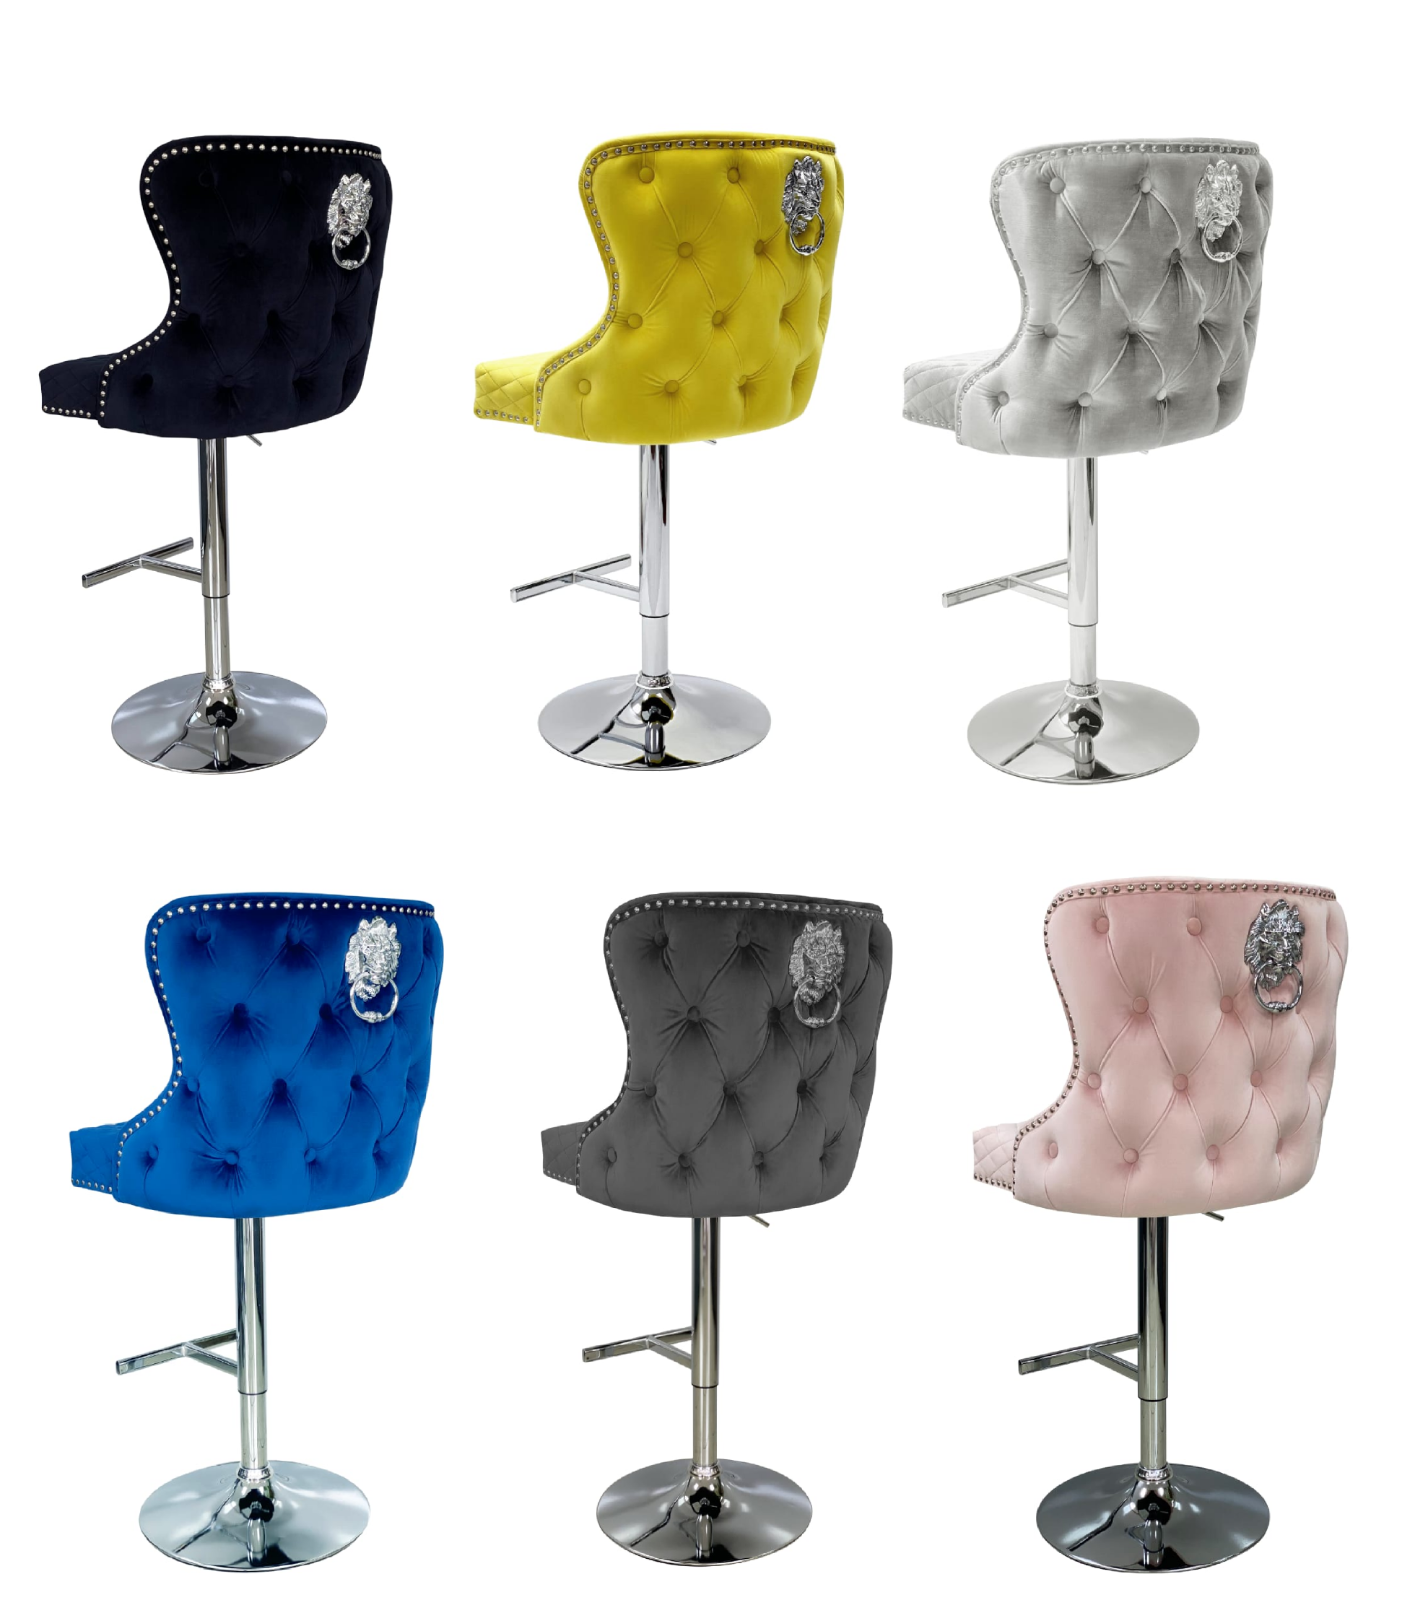 Valentino Bar Stool Lion Knocker Tufted Back Quilted Front Plush Velvet Fabric with Adjustable Chrome  Leg (Pack of 2 Stools)